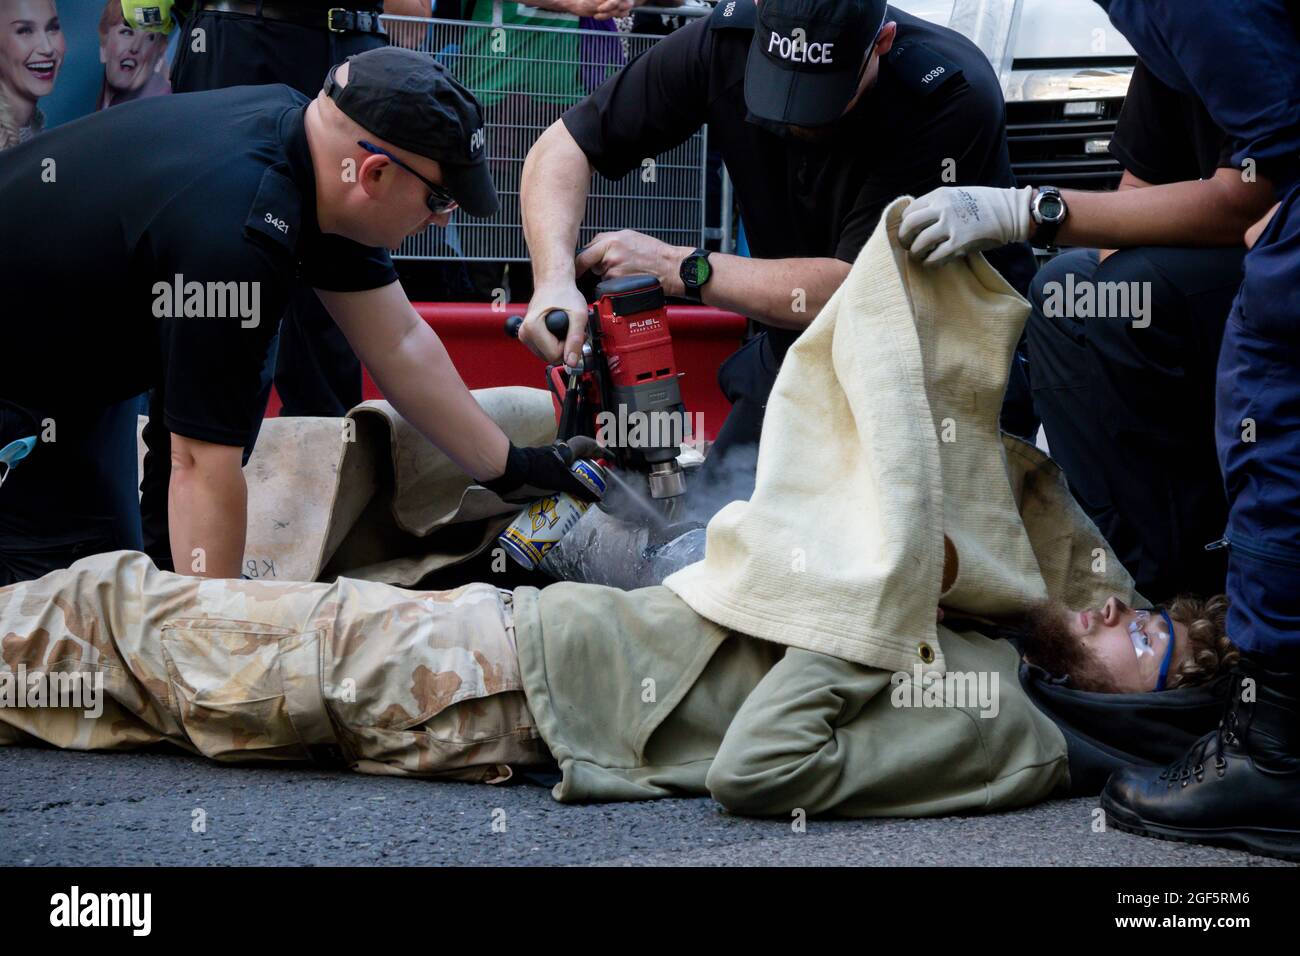 London, United Kingdom, 21st August 2021:- Specialist police officers use cutting equipment to remove Extinction Rebellion protesters from a metal pip Stock Photo